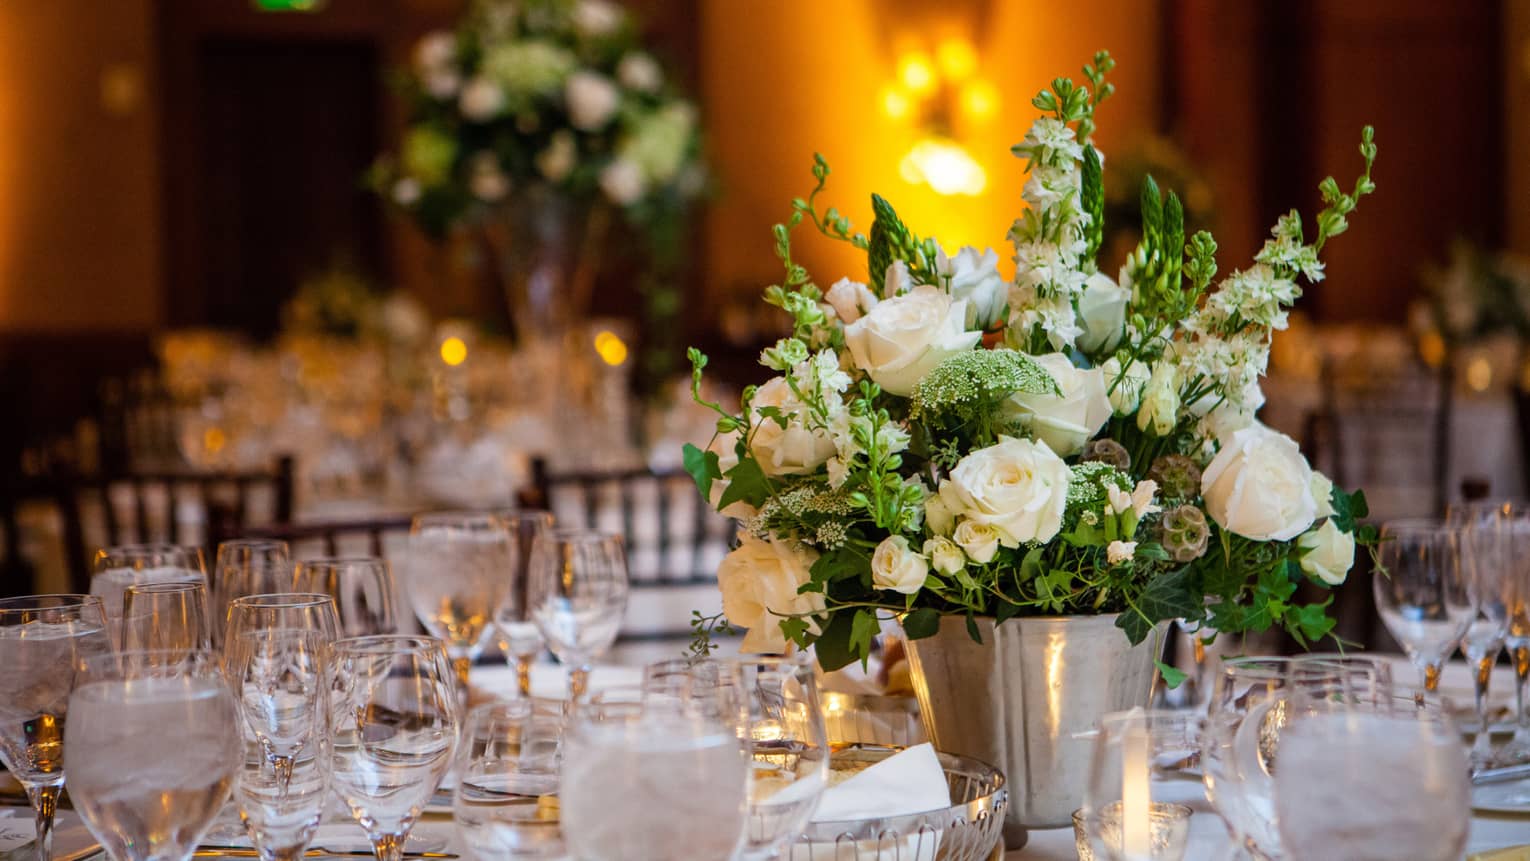 Wedding reception banquet table with glassware, white roses in vase